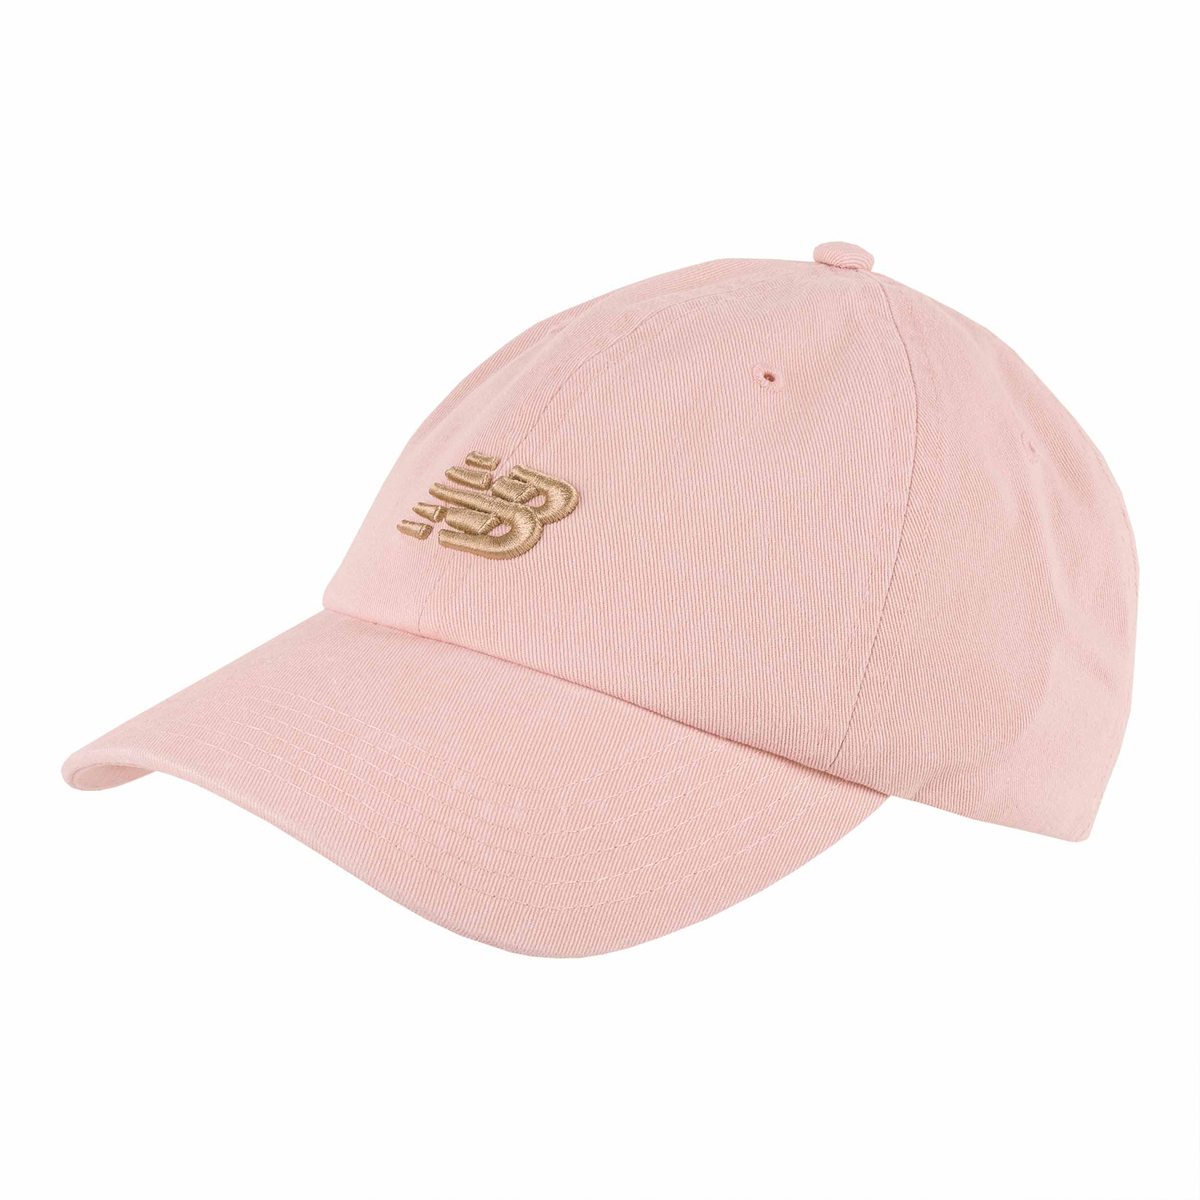 Classic Curved Strapback - Washed Pink Haze